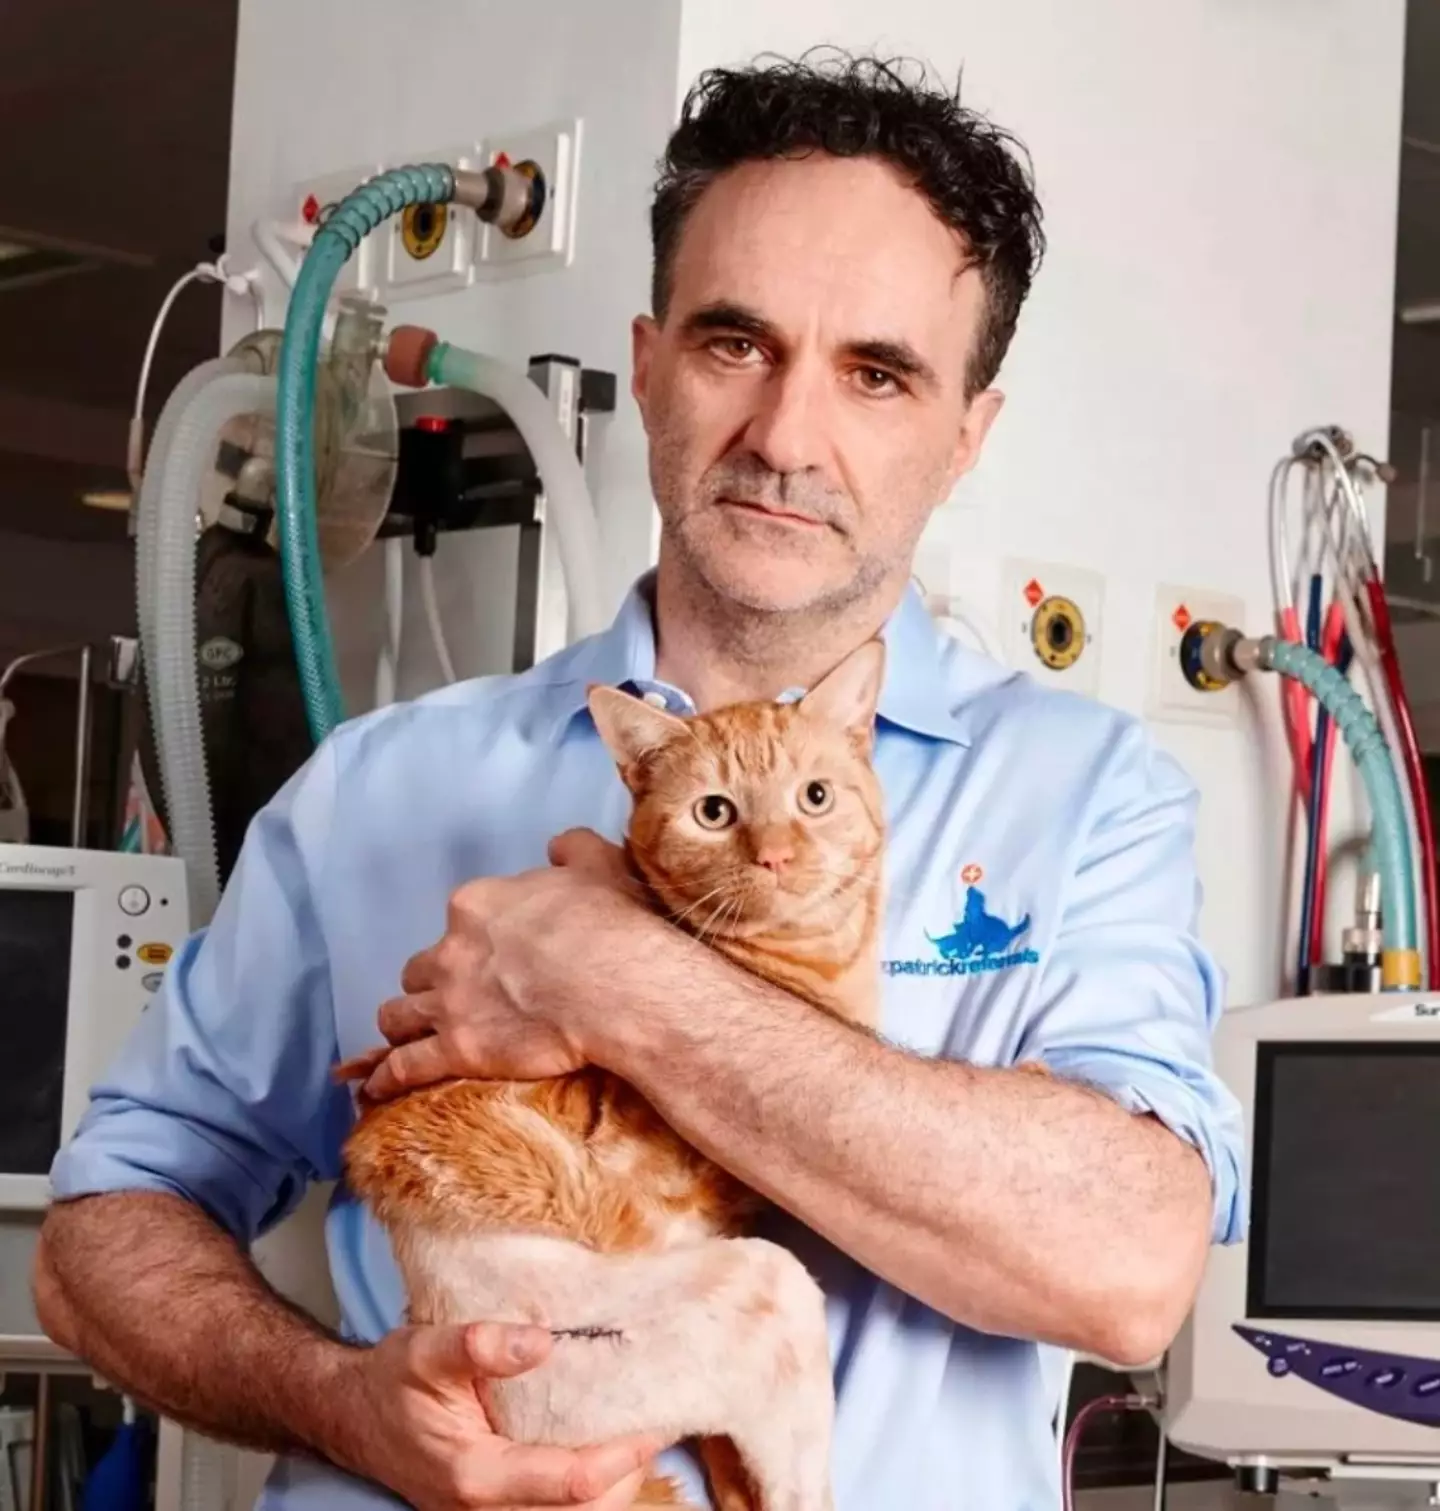 Noel Fitzpatrick is the man who inspired Britney's pop hit.